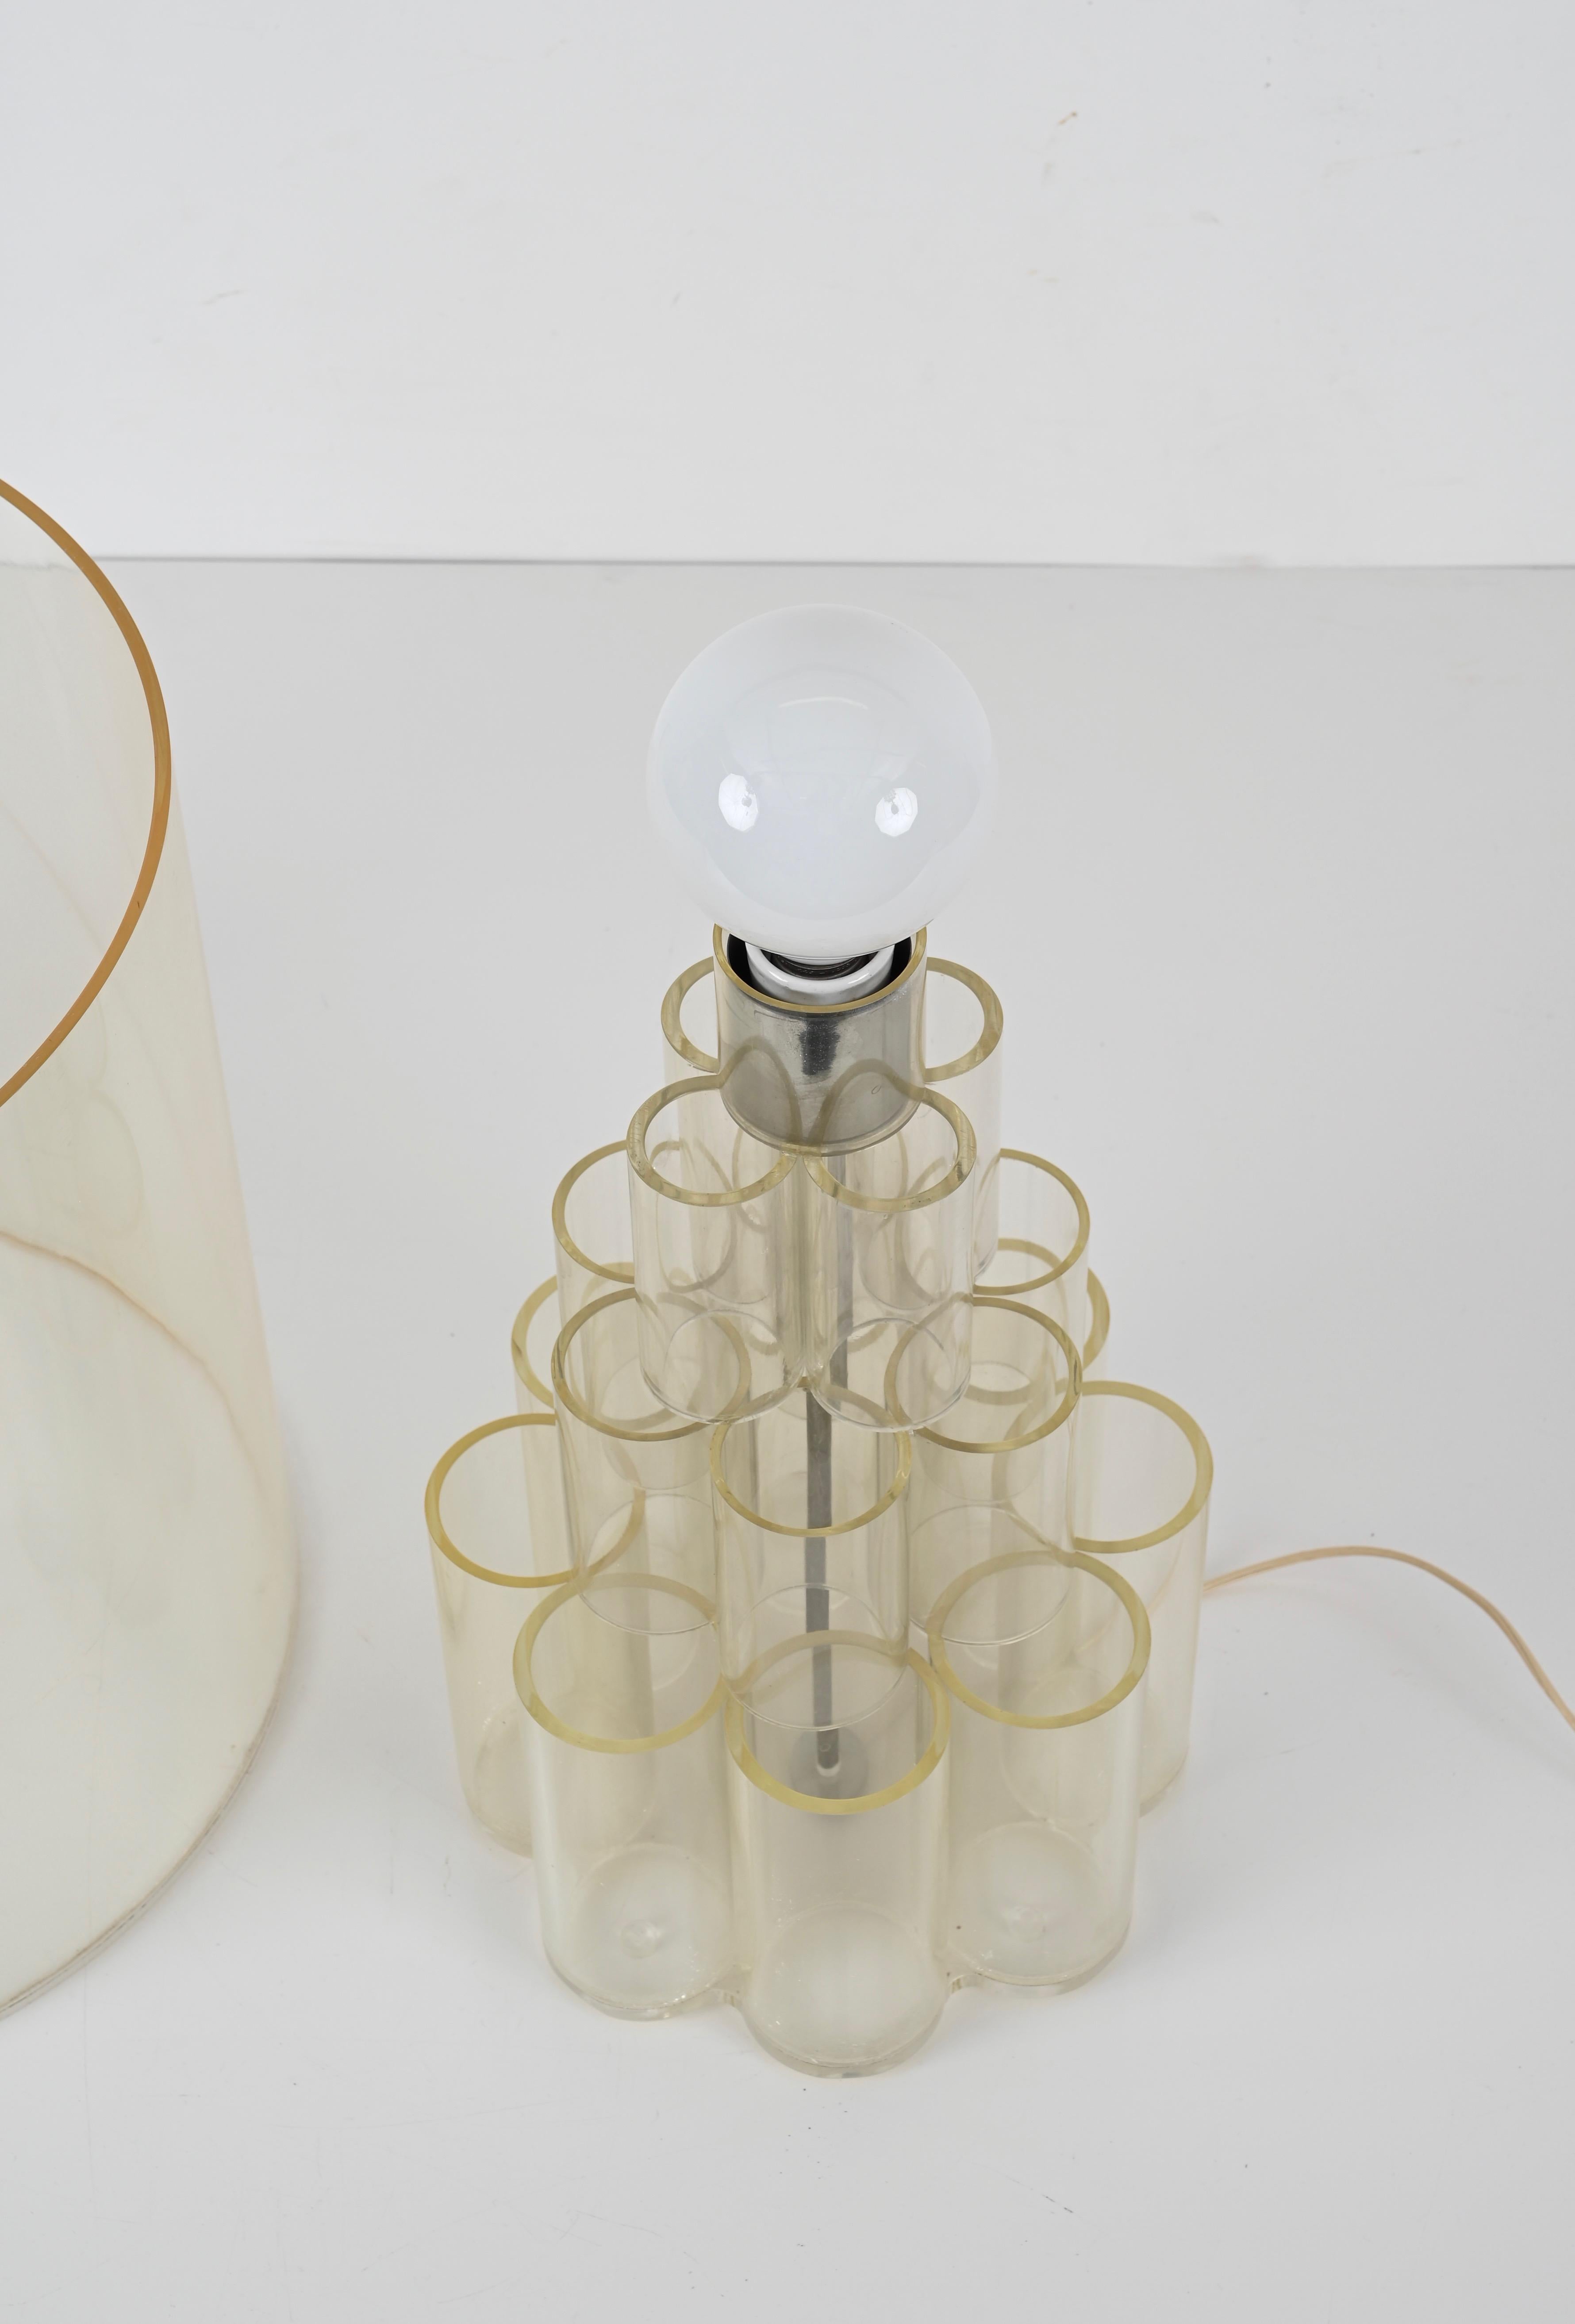 Mid-Century Modern Table Lamp in Lucite Plexiglass, Panton Style, Italy, 1970s For Sale 2